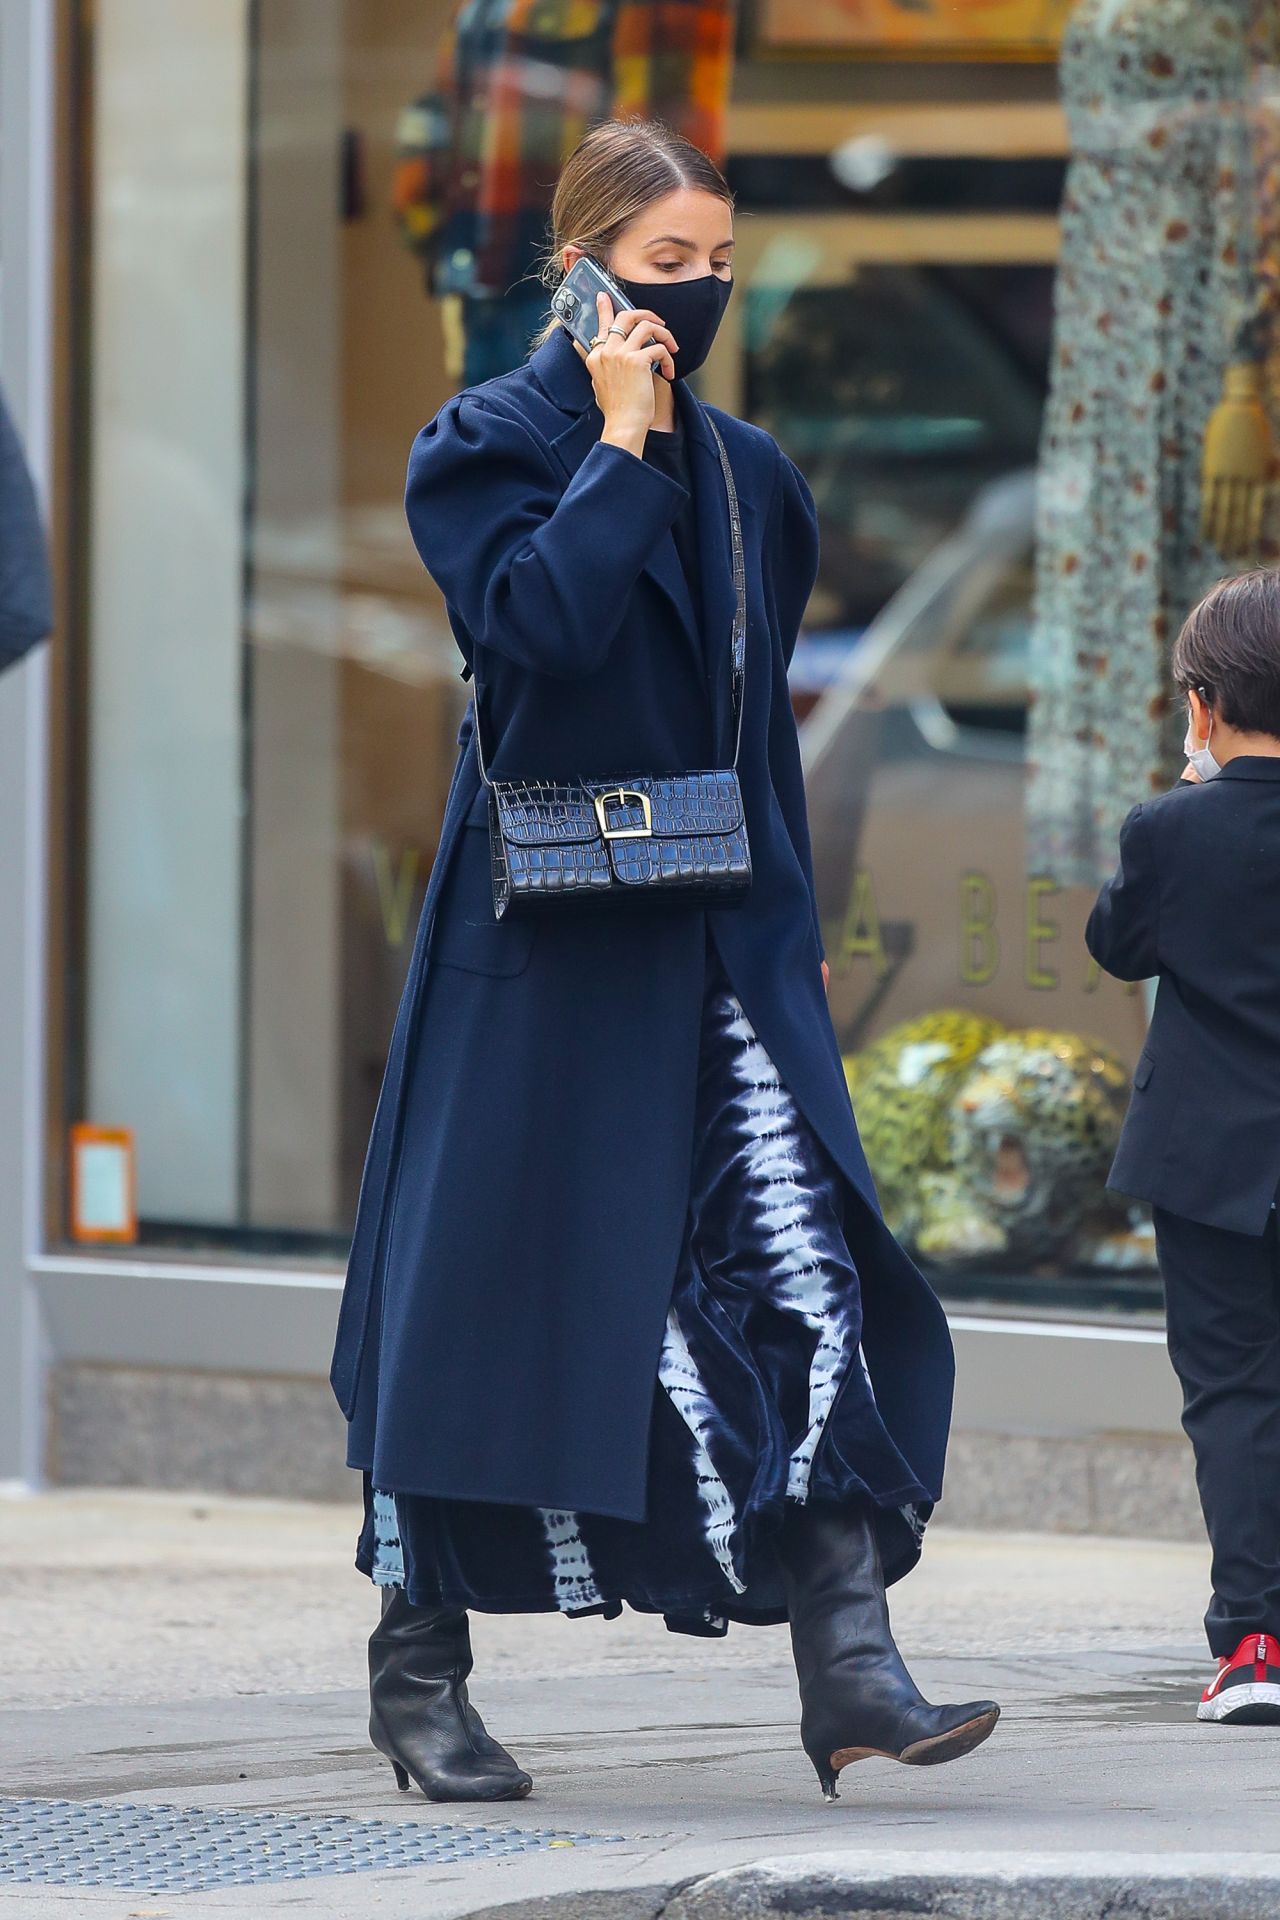 dianna-agron-autumn-street-style-chats-on-her-phone-in-nyc-10-20-2020-2.jpg